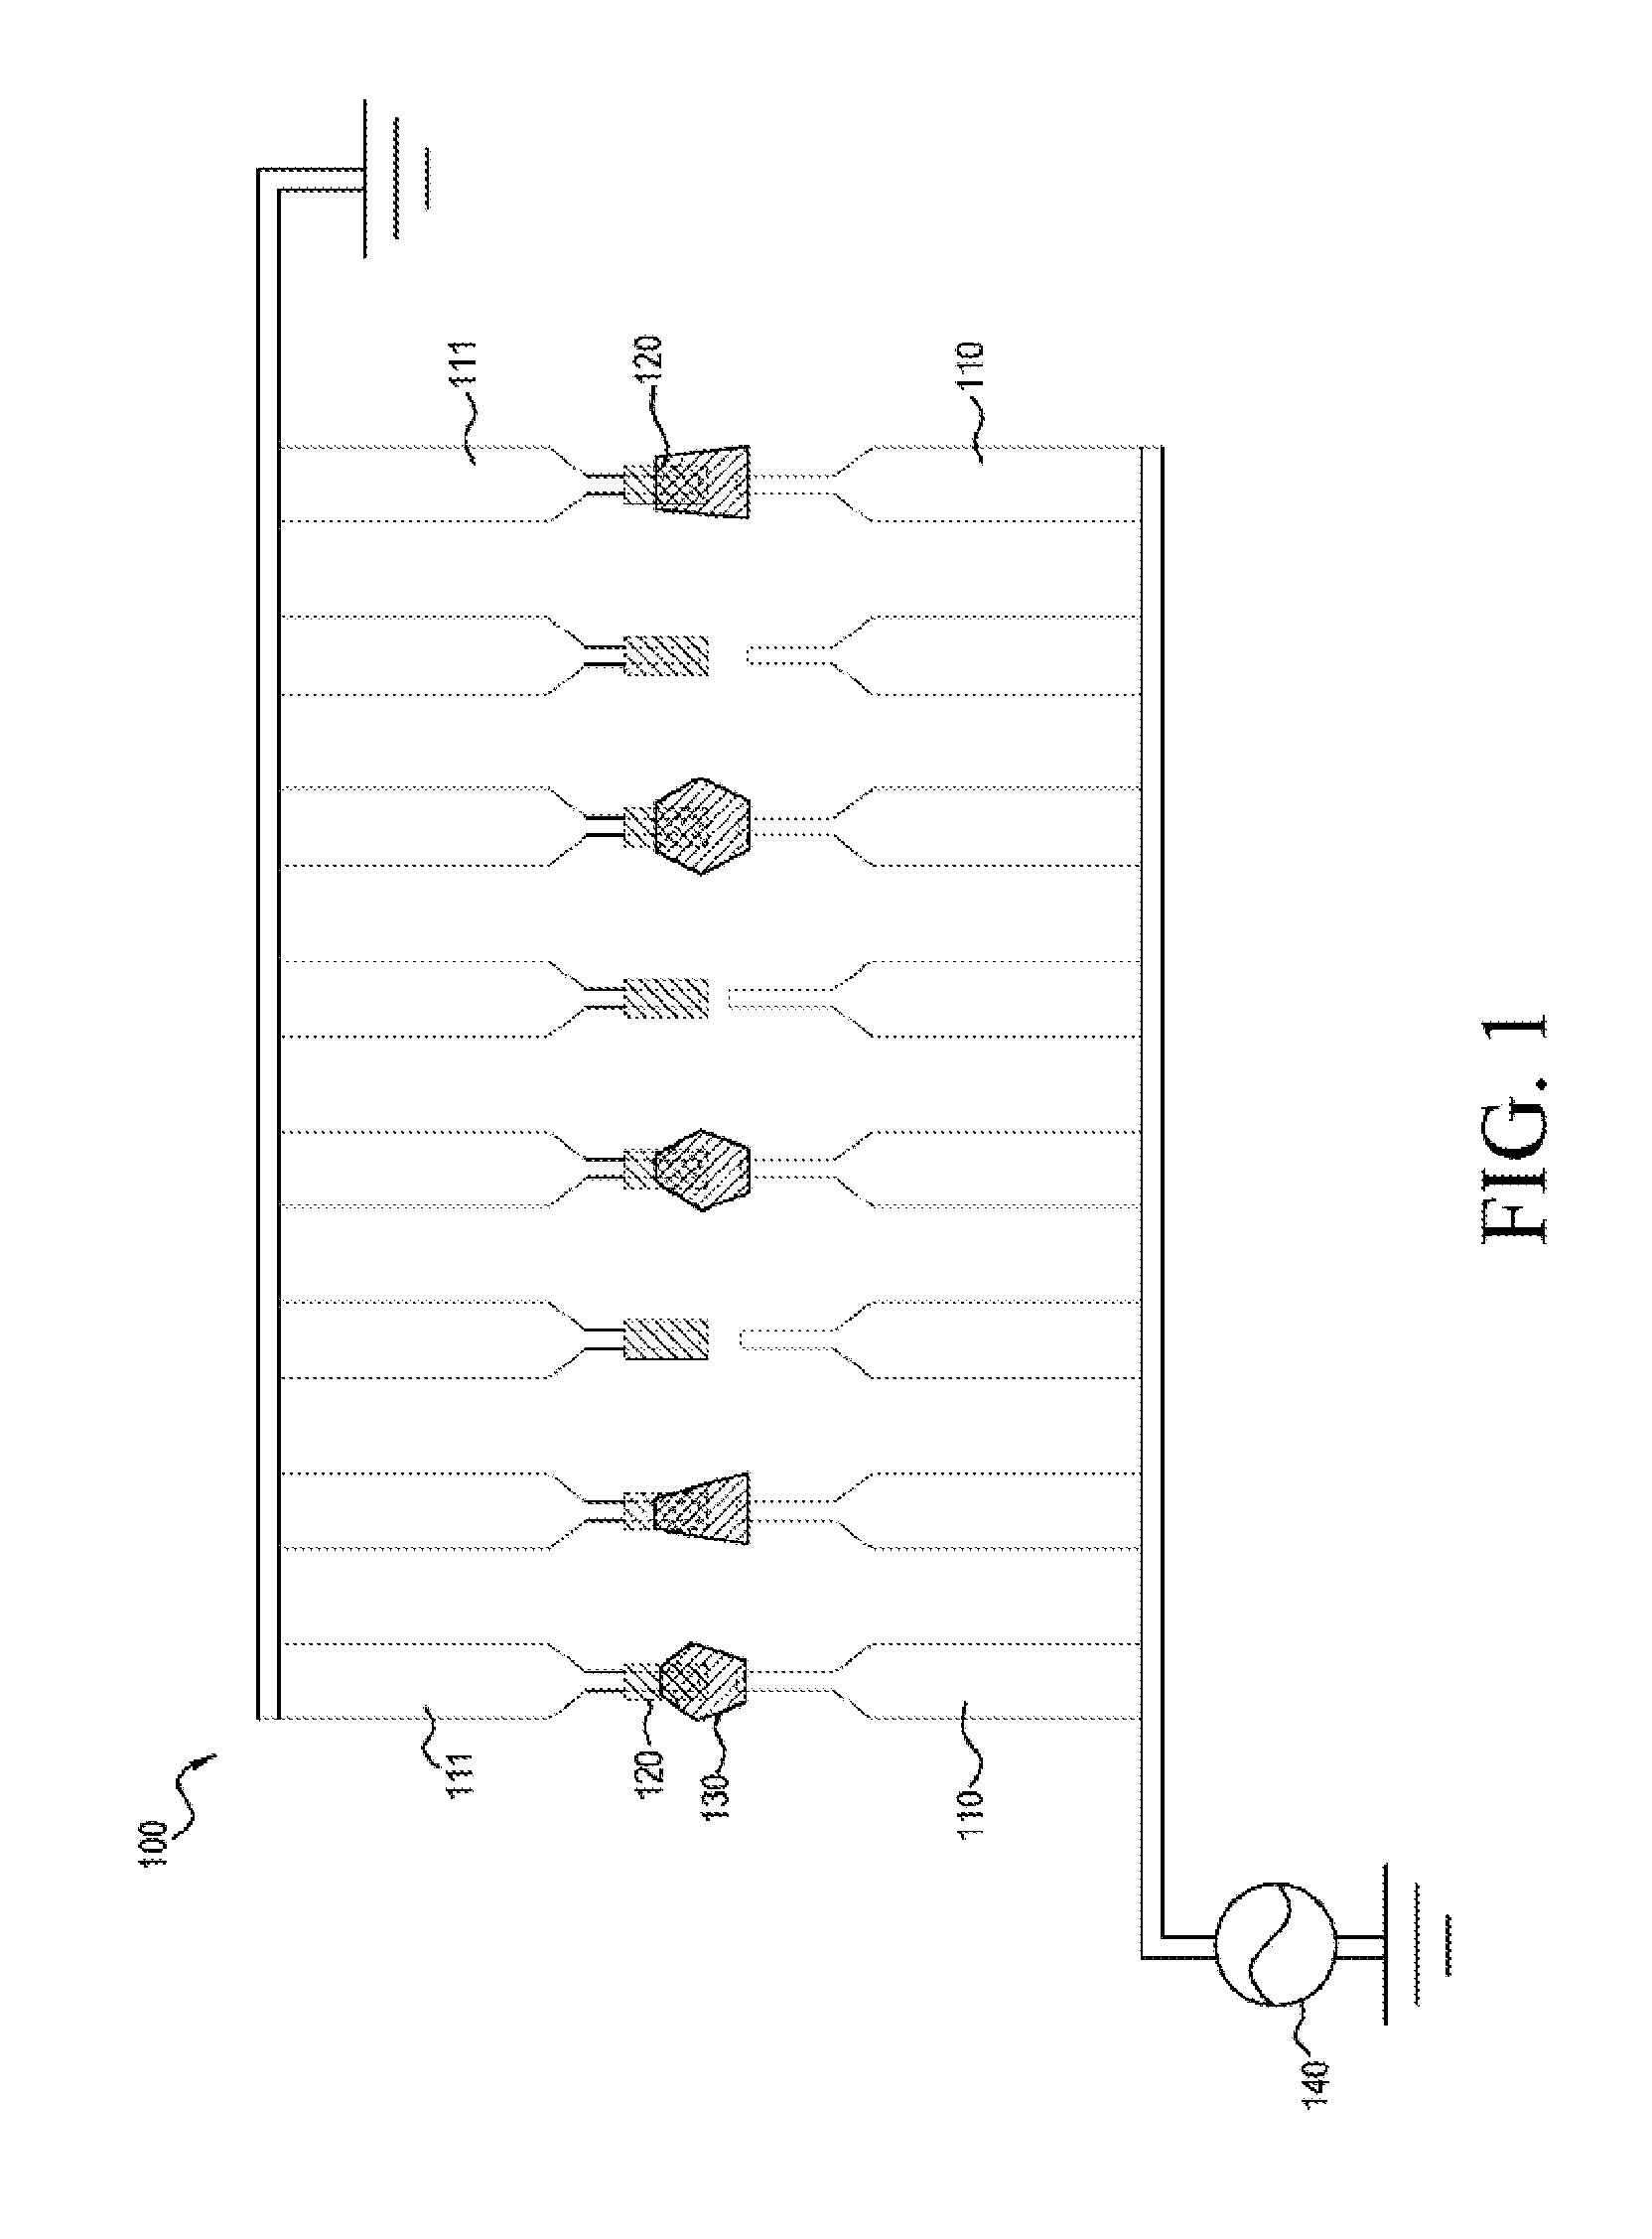 Graphene screening and separation method and device